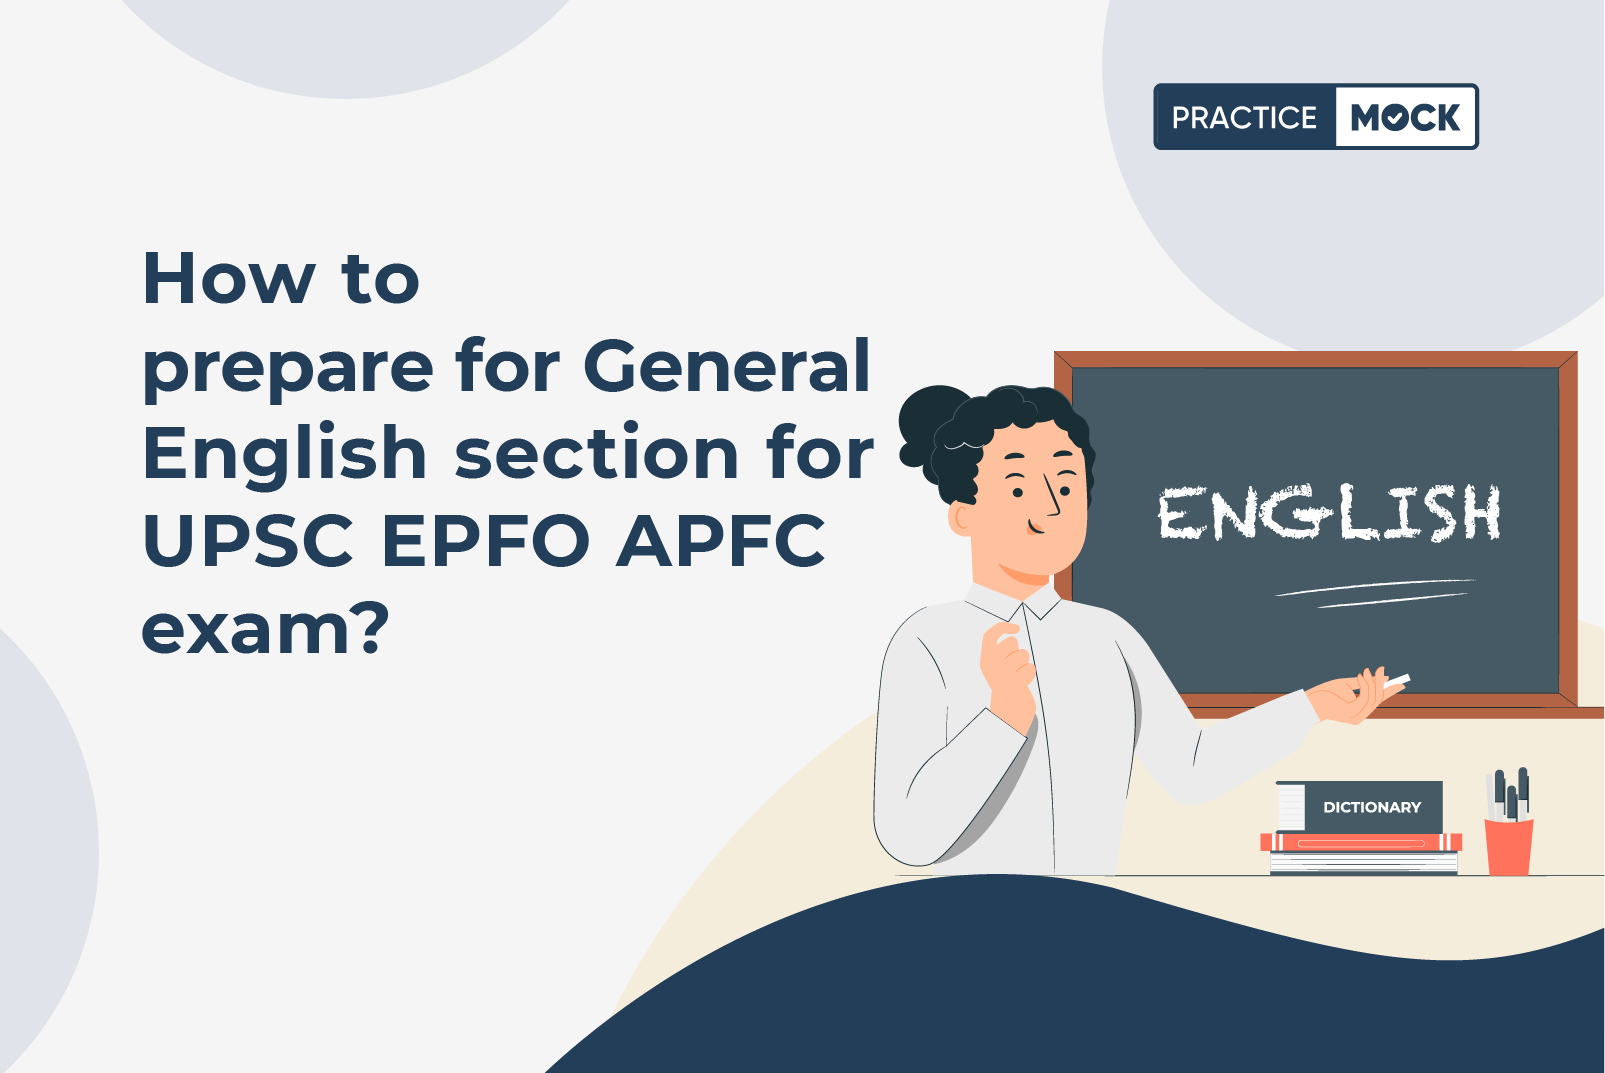 How to prepare for the General English section of UPSC EPFO APFC exam